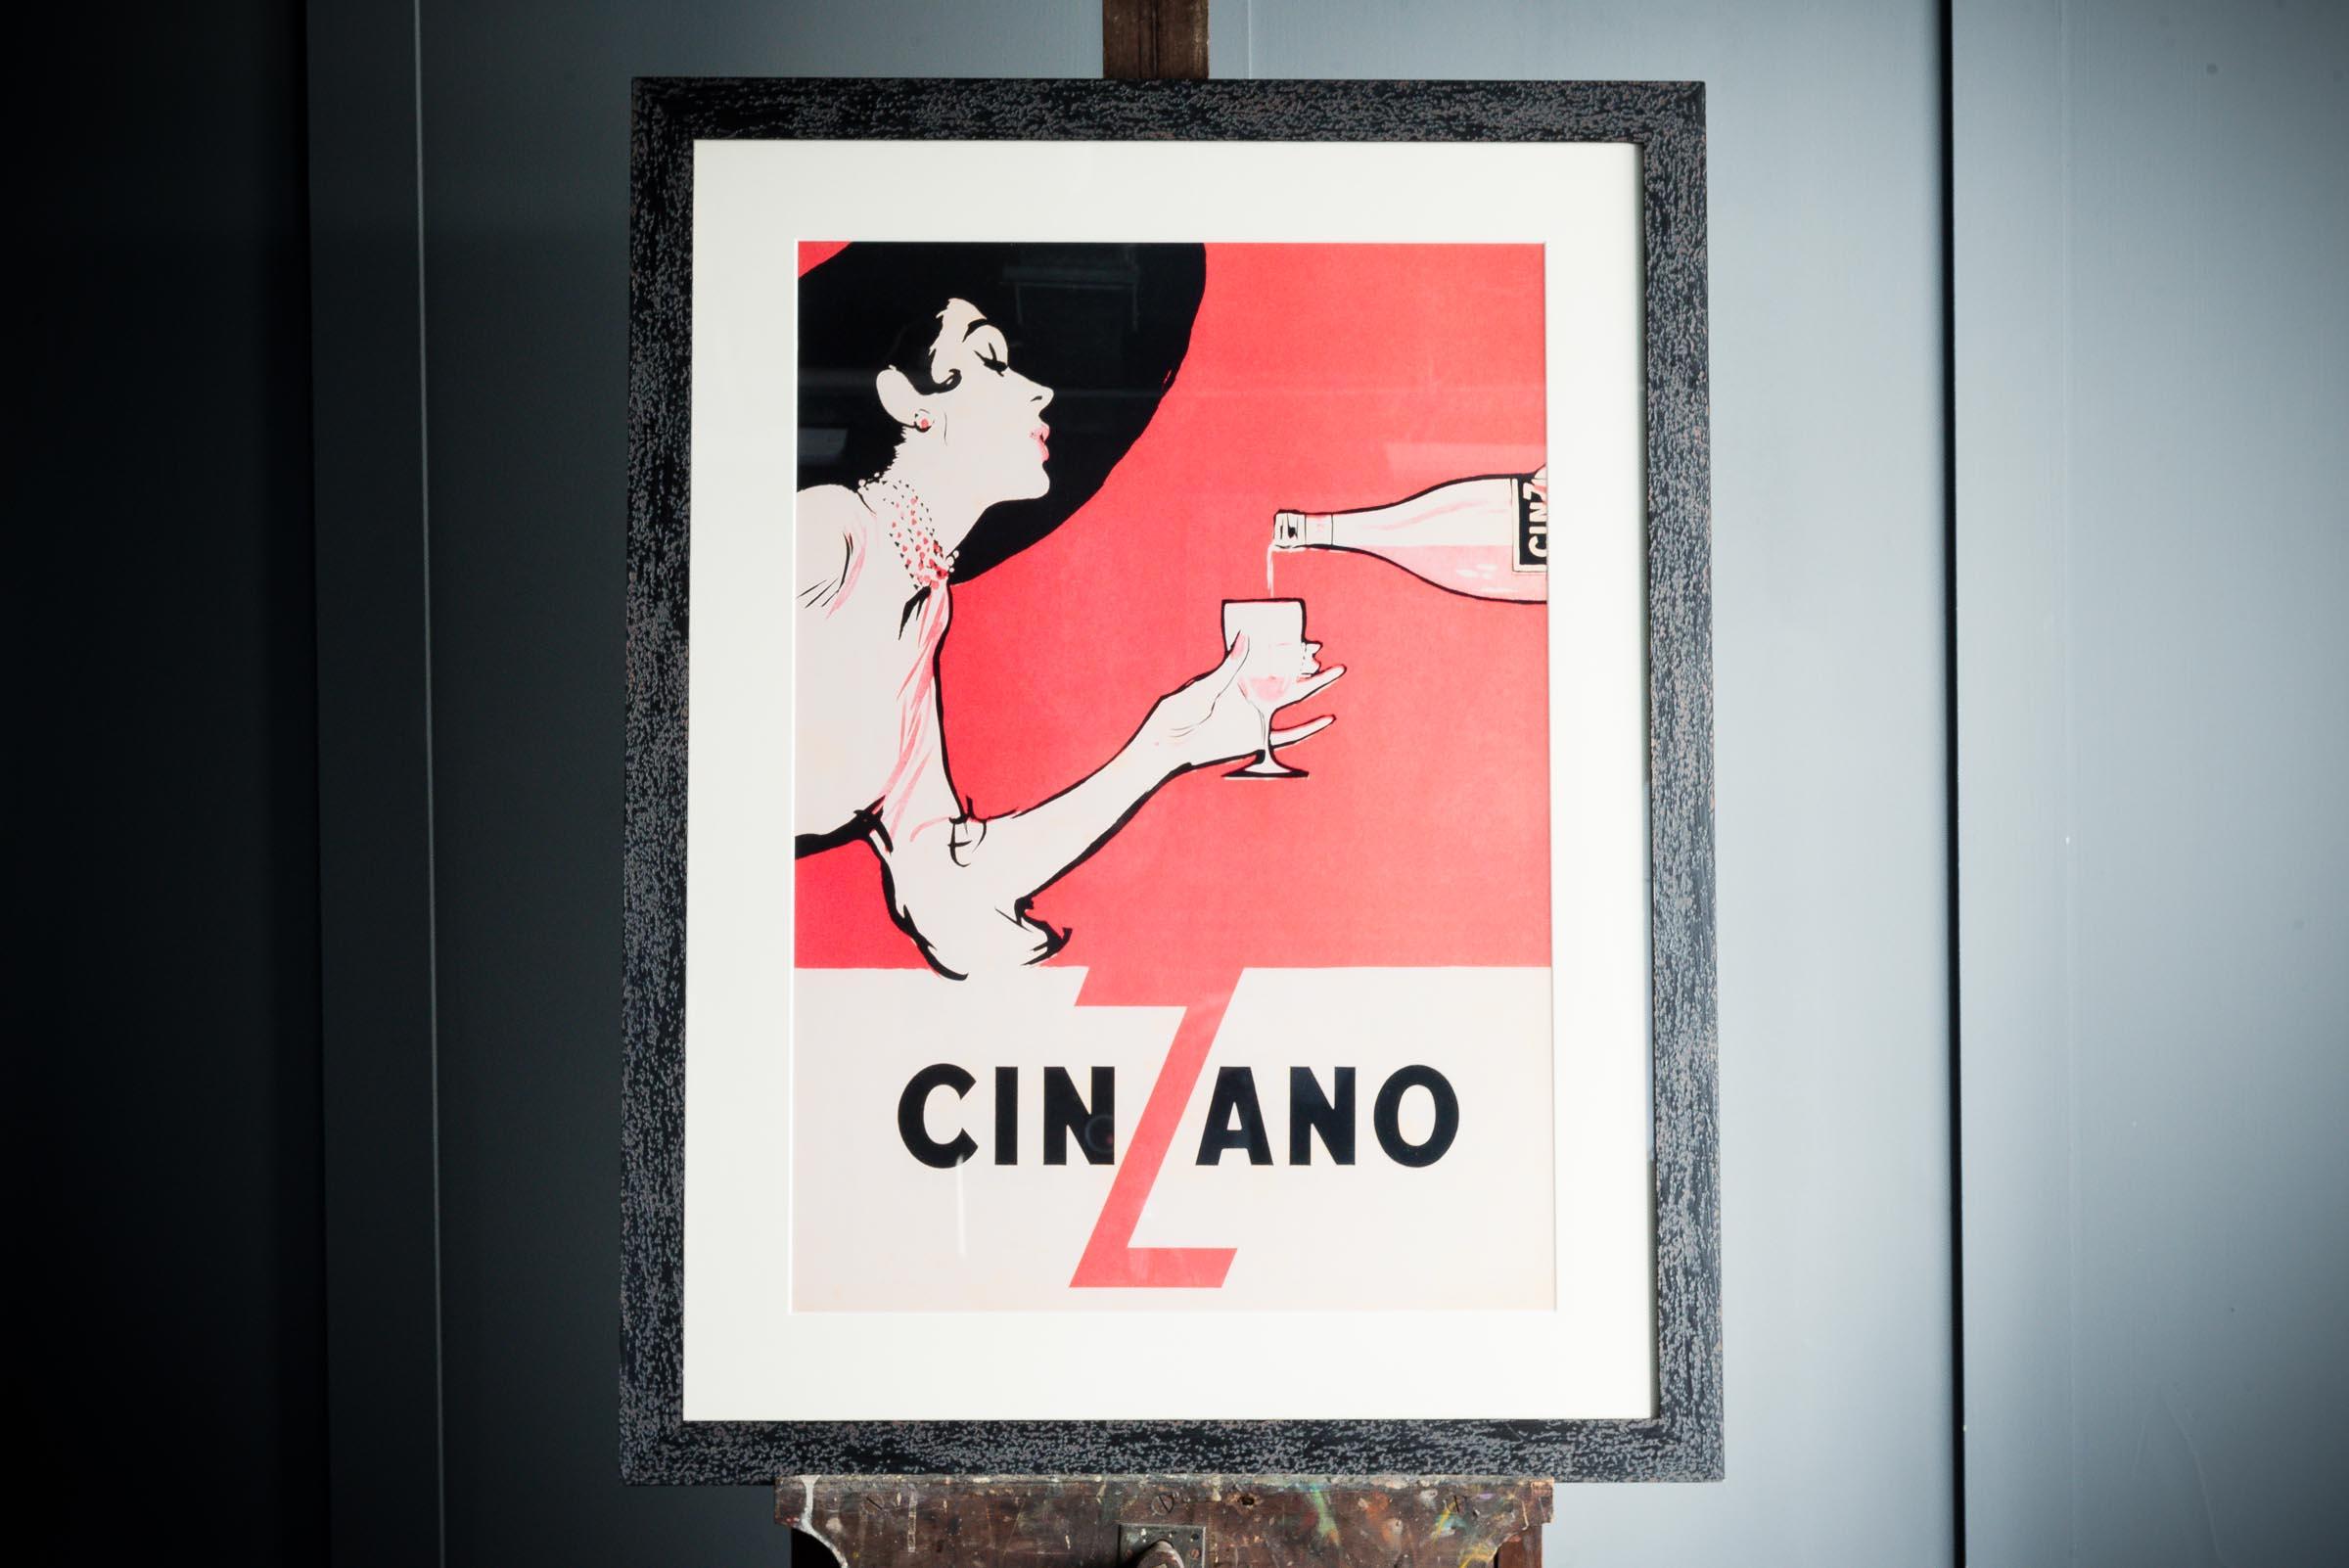 1950's advertising poster showcasing the alcoholic beverage Cinzano. The poster comes in a black wooden frame.